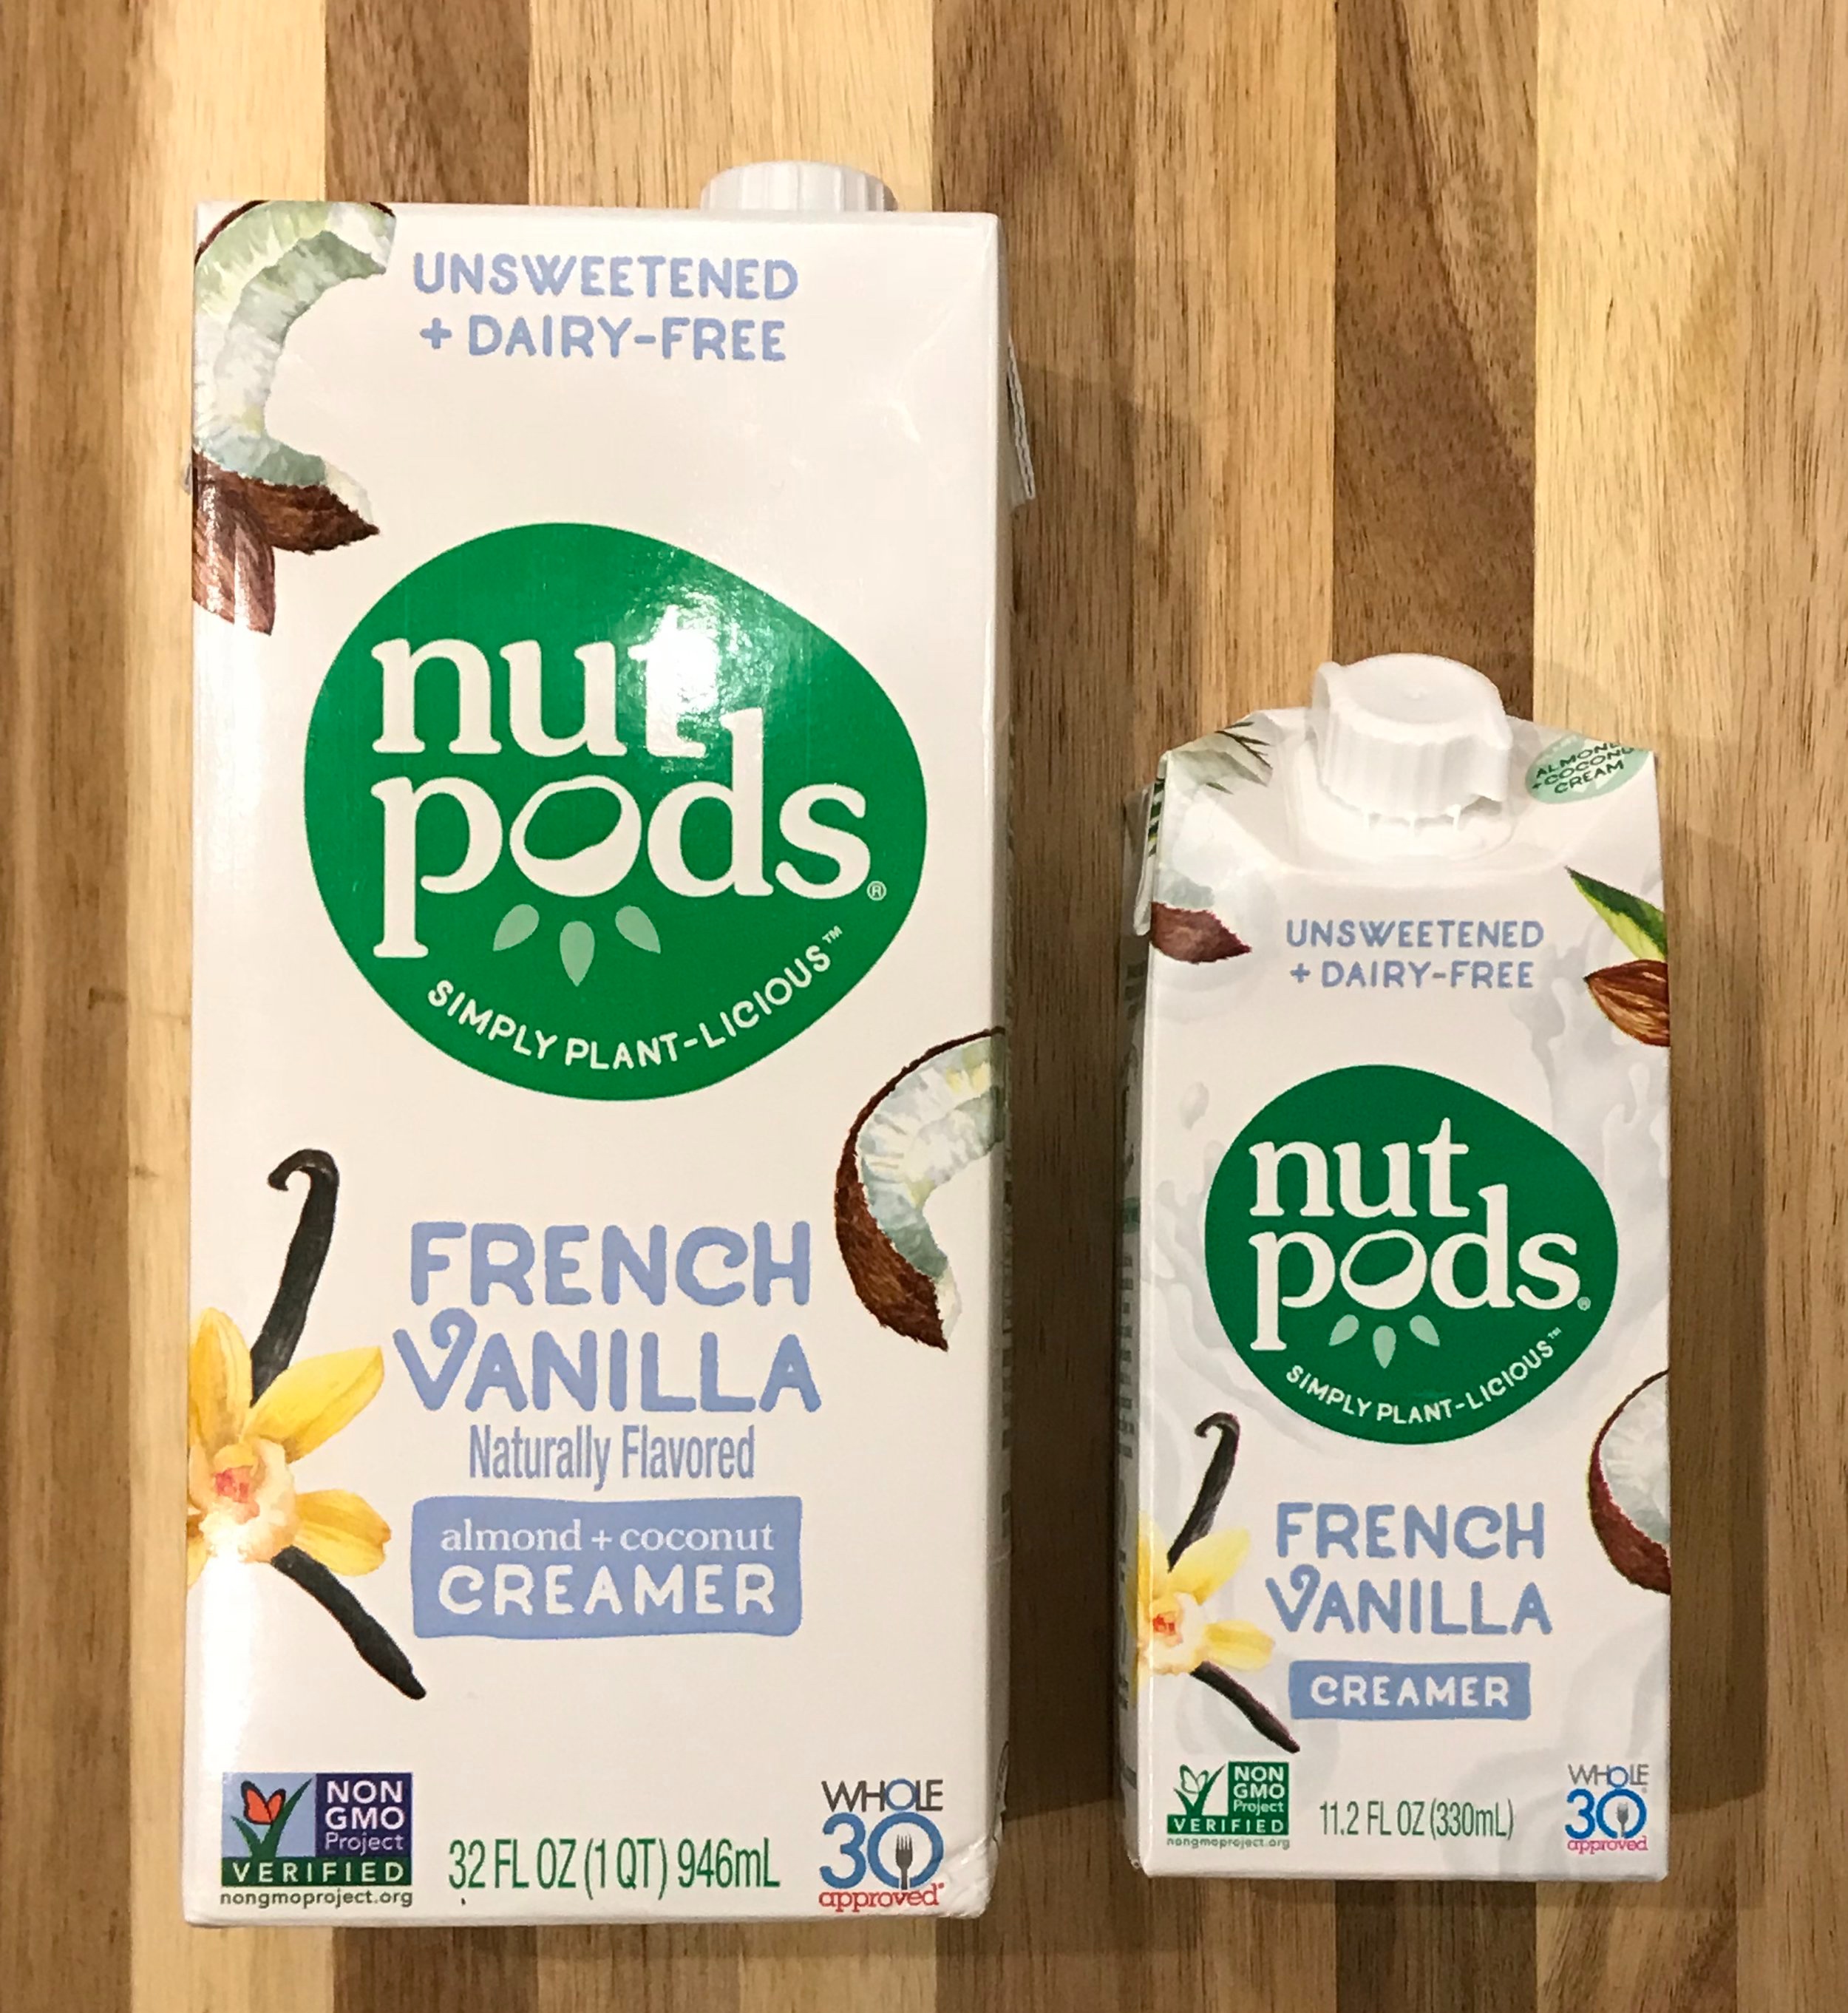 Nutpods now available in 32oz containers!